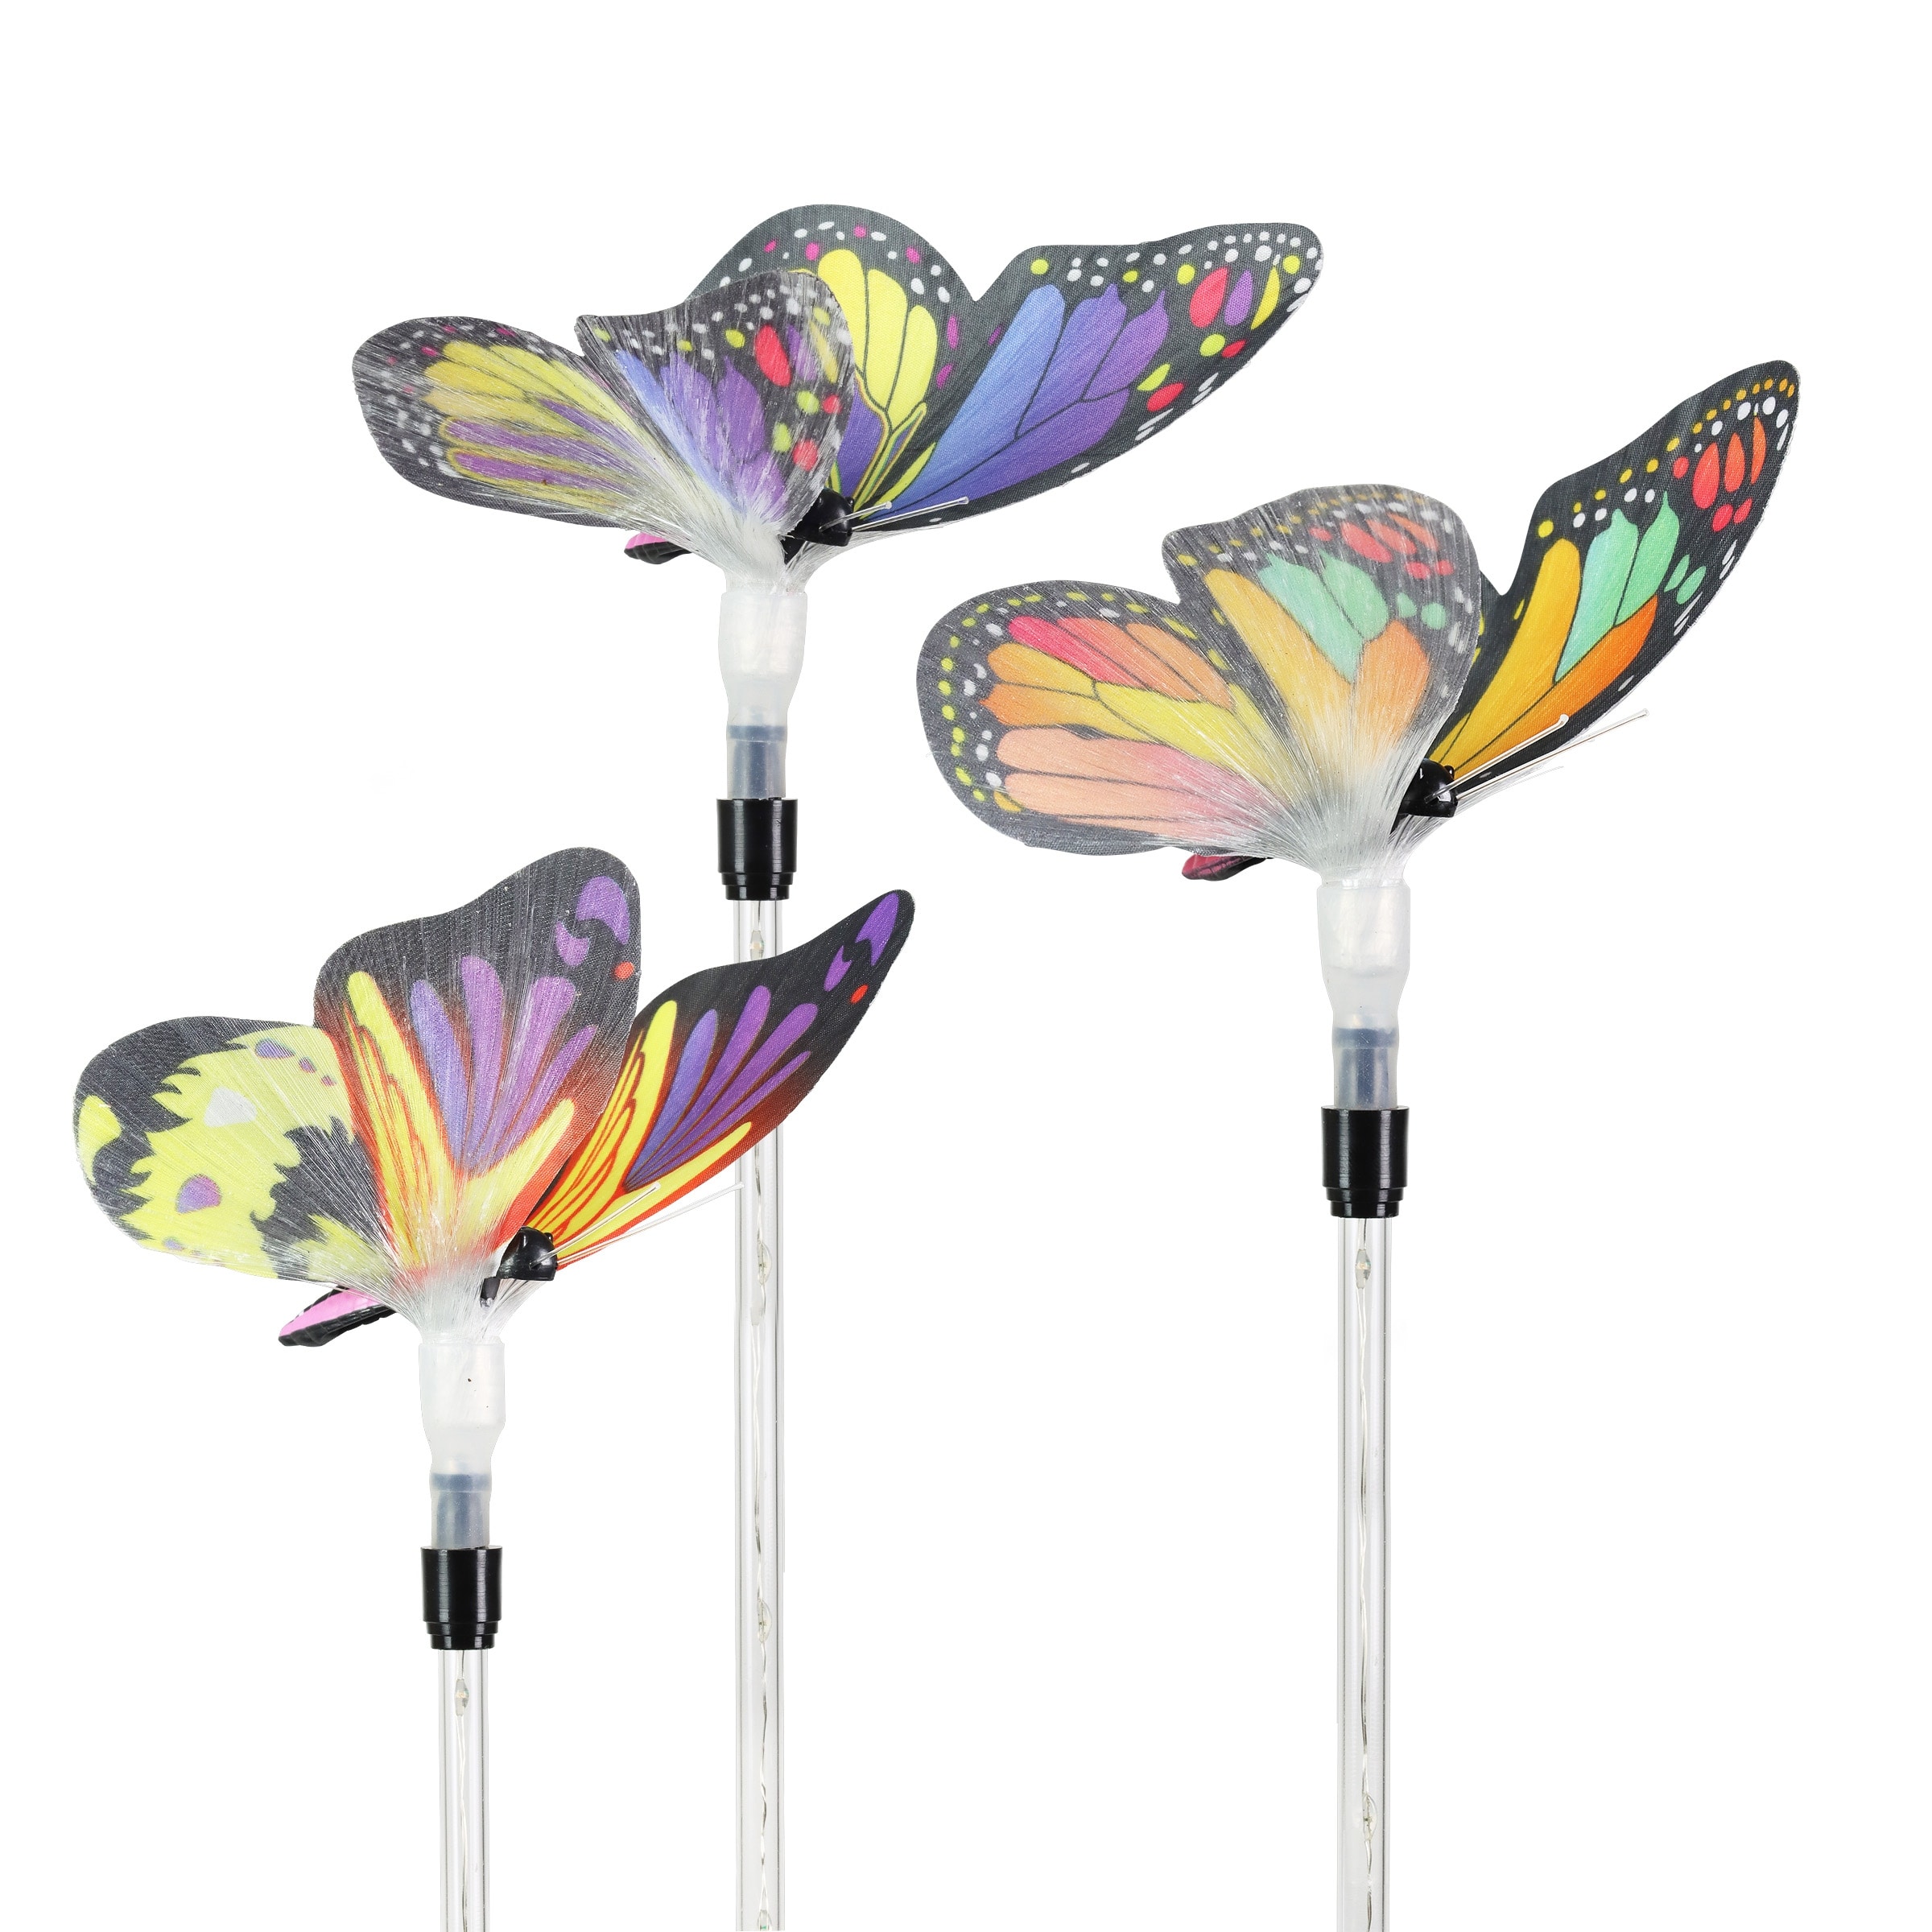 Exhart Solar Fiber Optic Color Changing Butterfly Garden Stake Set of  with LED Stake, by 30 Inches Bed Bath  Beyond 35638632